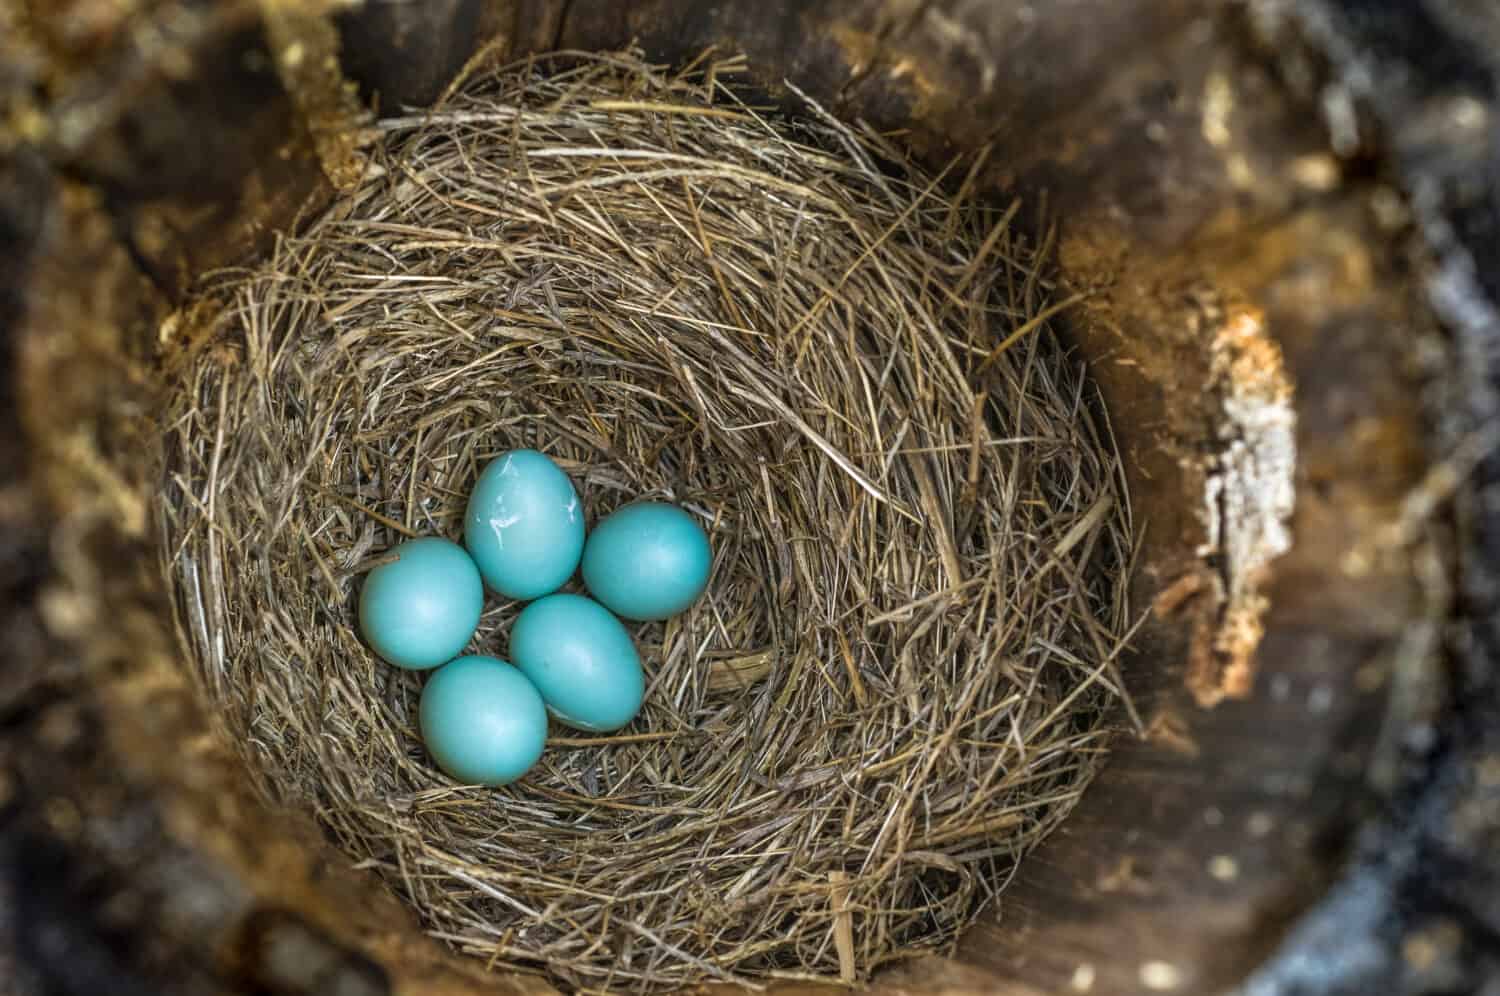 An Eastern Bluebird  ( Sialia sialis )  nest with 5 pale blue eggs.  The nest site is in a natural cavity of a hollow log cut and placed on a post.